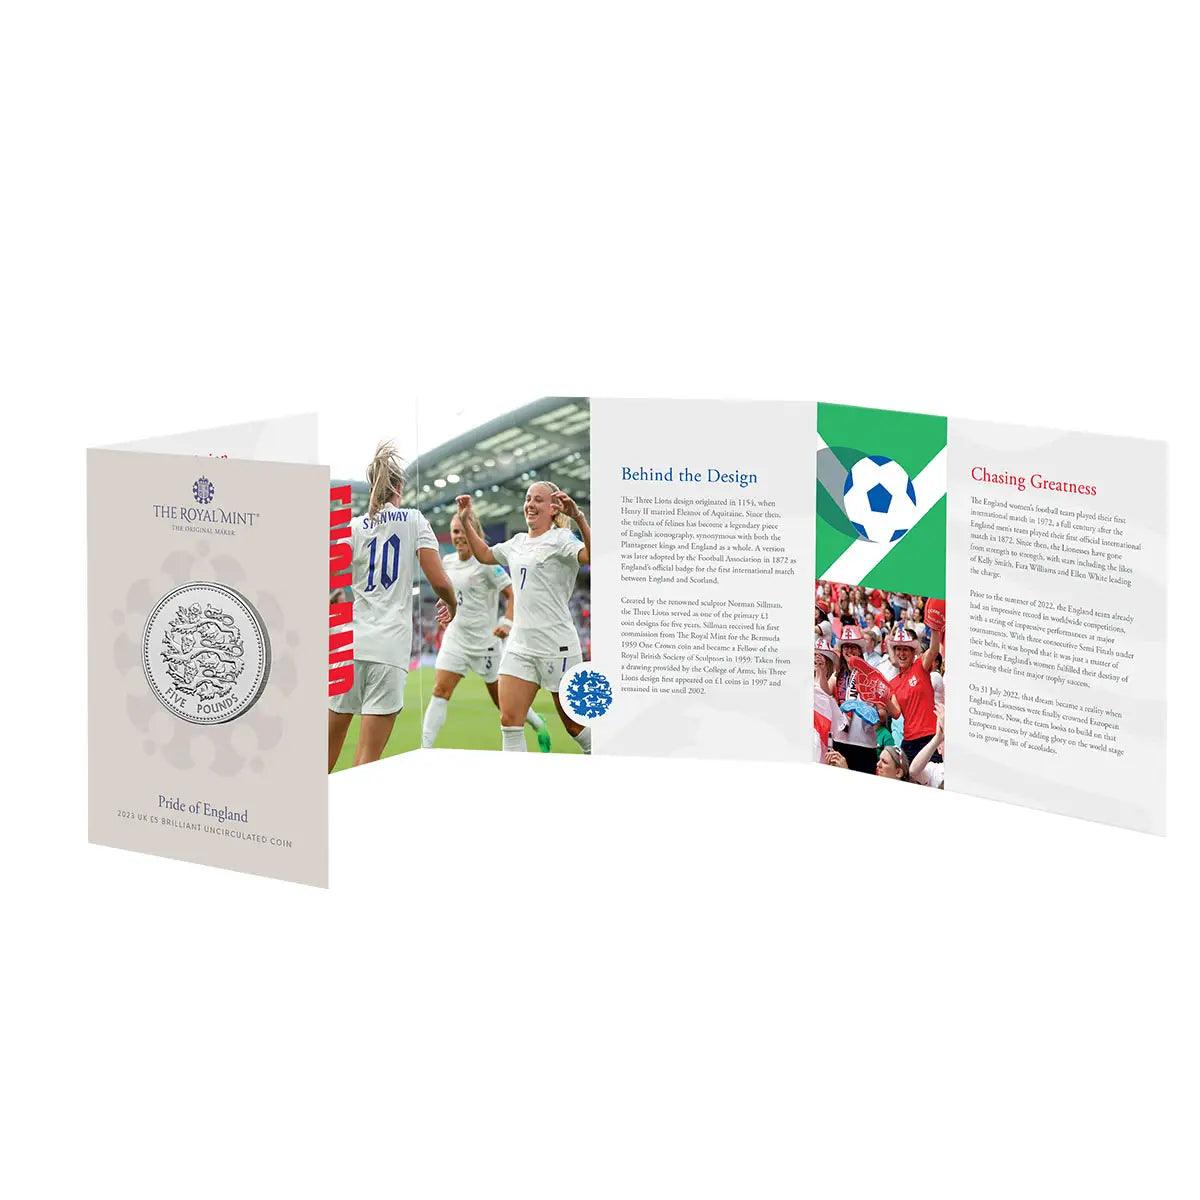 Pride of England 2023 UK £5 Brilliant Uncirculated - FIFA Women's World Cup - Lionesses - Loose Change Coins